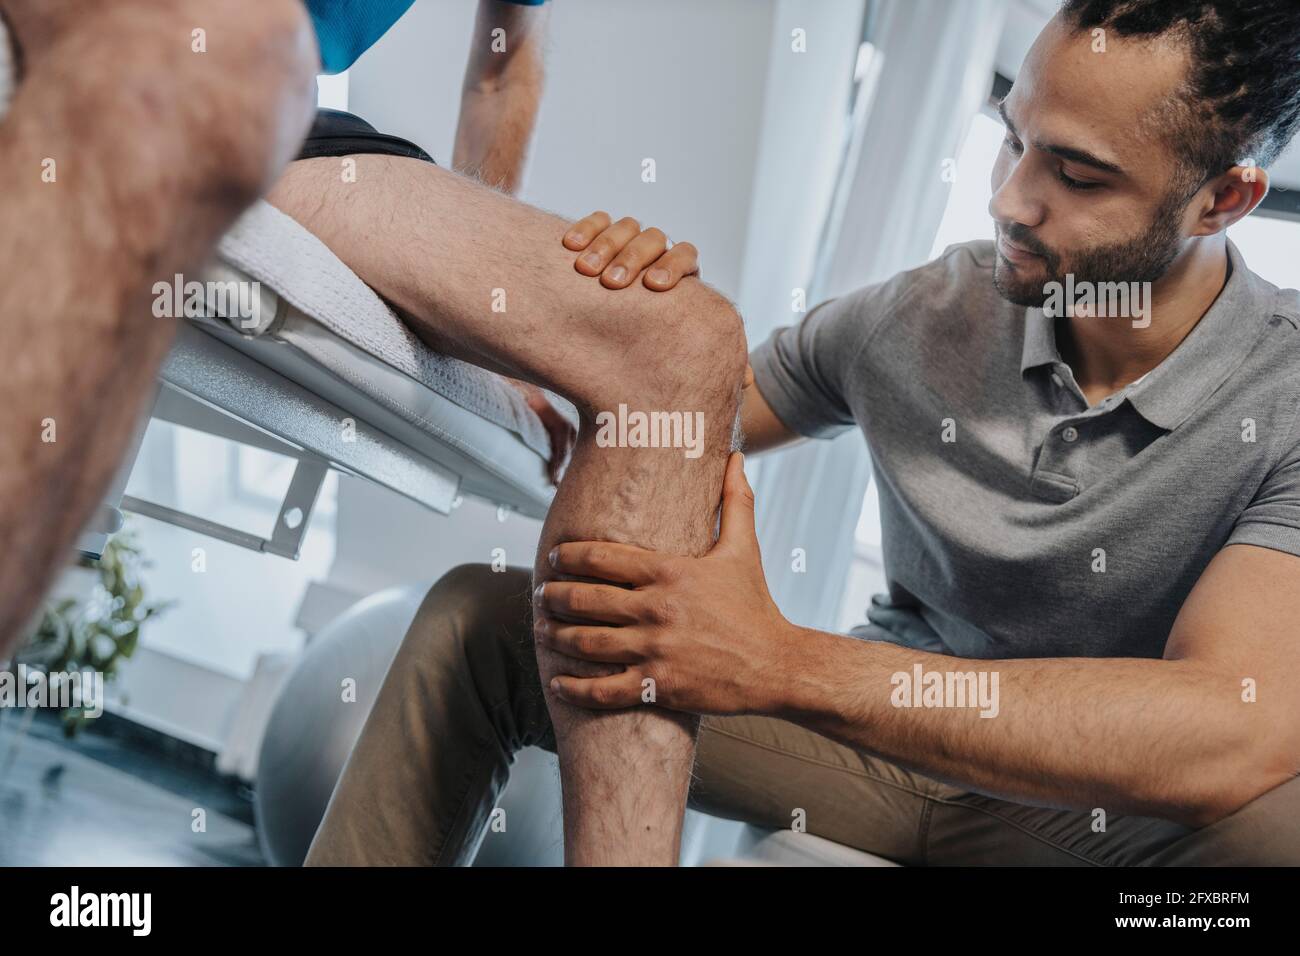 Male Physical therapist examining knee of patient in practice Stock Photo